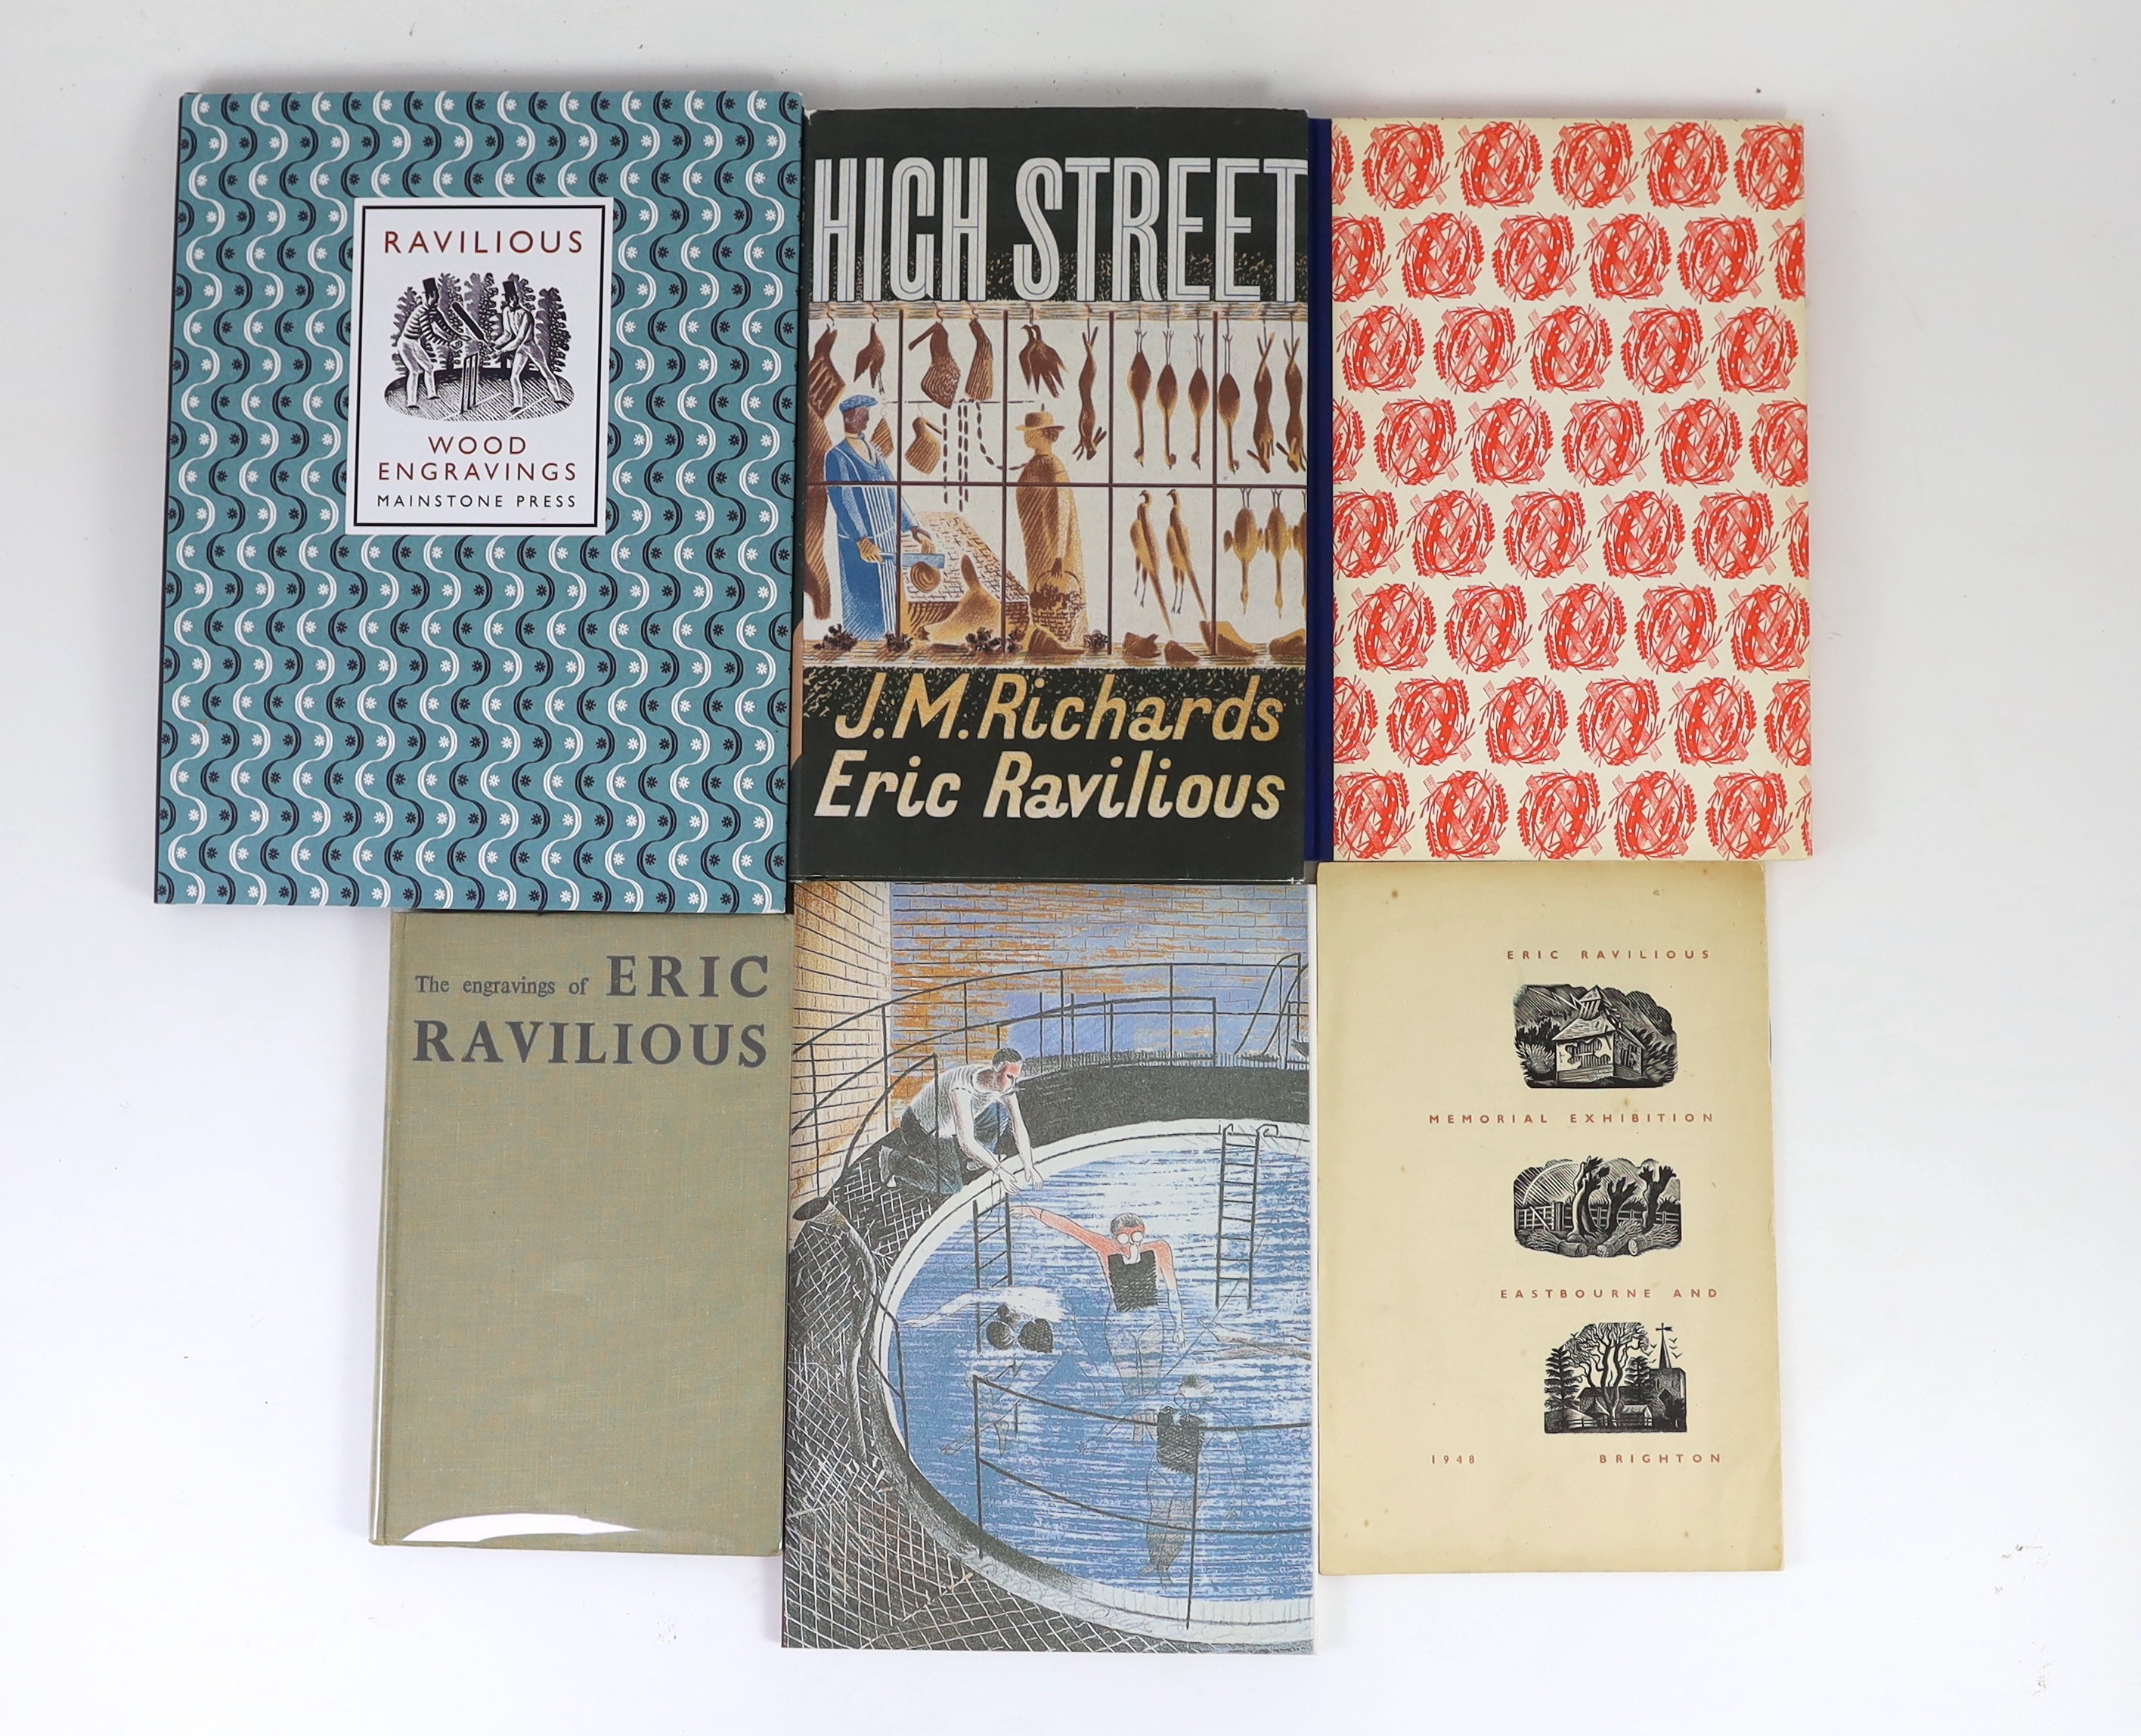 Ravilious, Eric - 14 works, about or Illustrated by:- Ravilious in pictures- (4 monographs, consisting Sussex and the Downs, The War Paintings, A Country Life and A Travelling Artist); Ravilious Submarine, The Mainstone